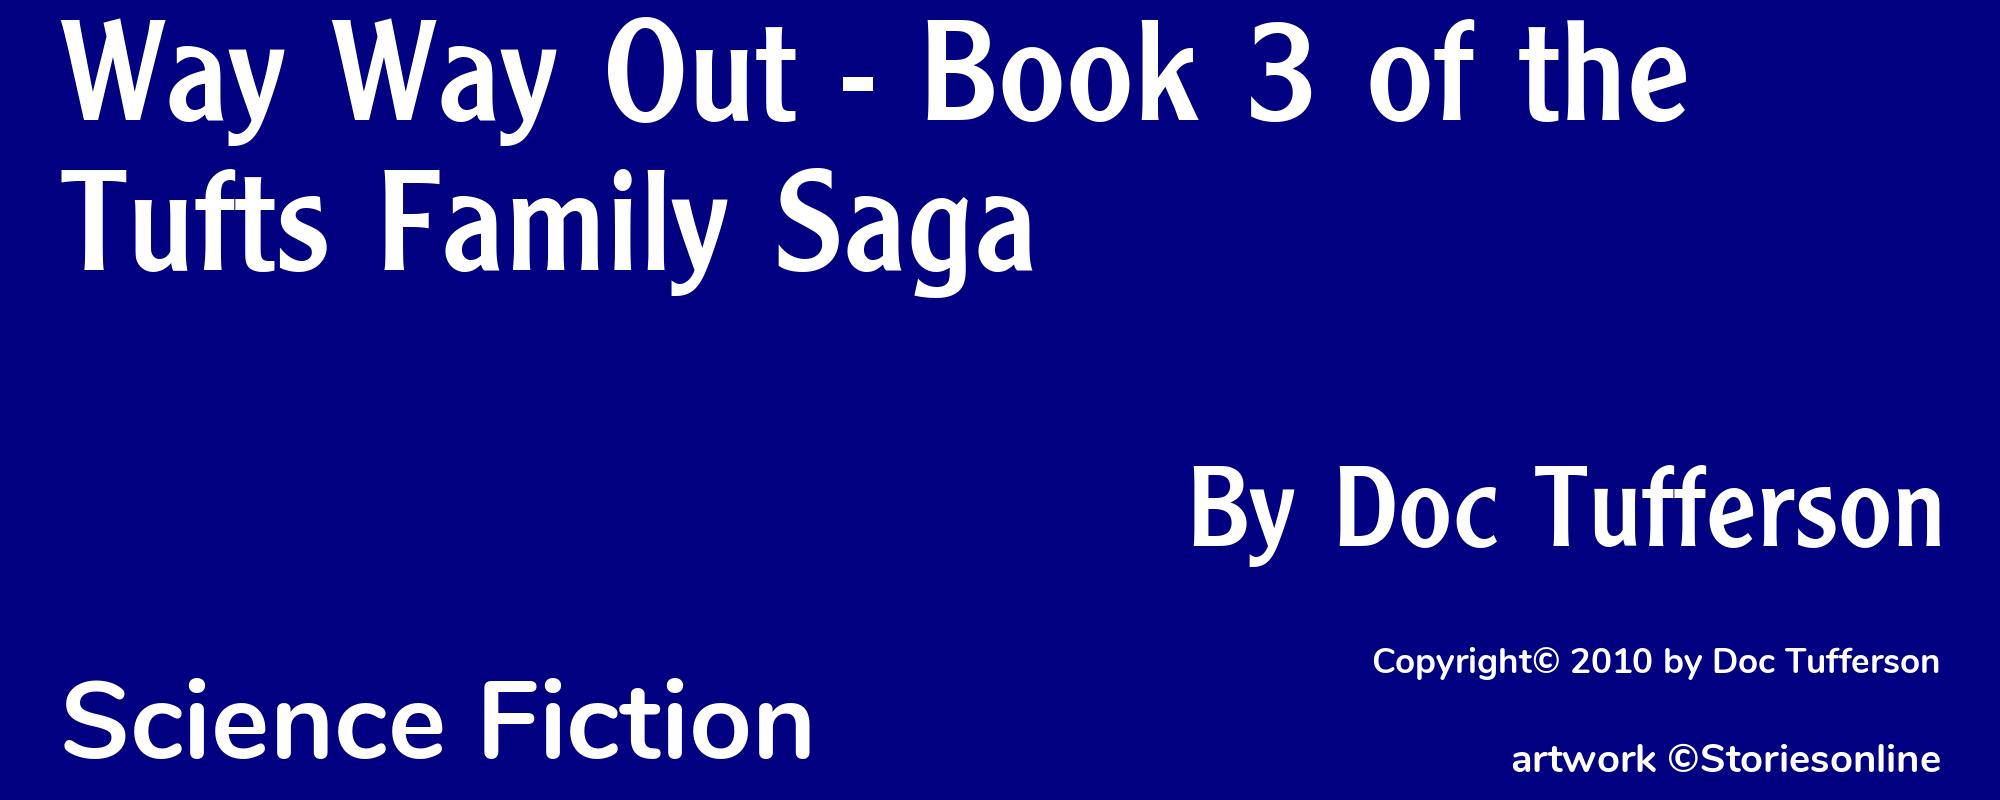 Way Way Out - Book 3 of the Tufts Family Saga - Cover